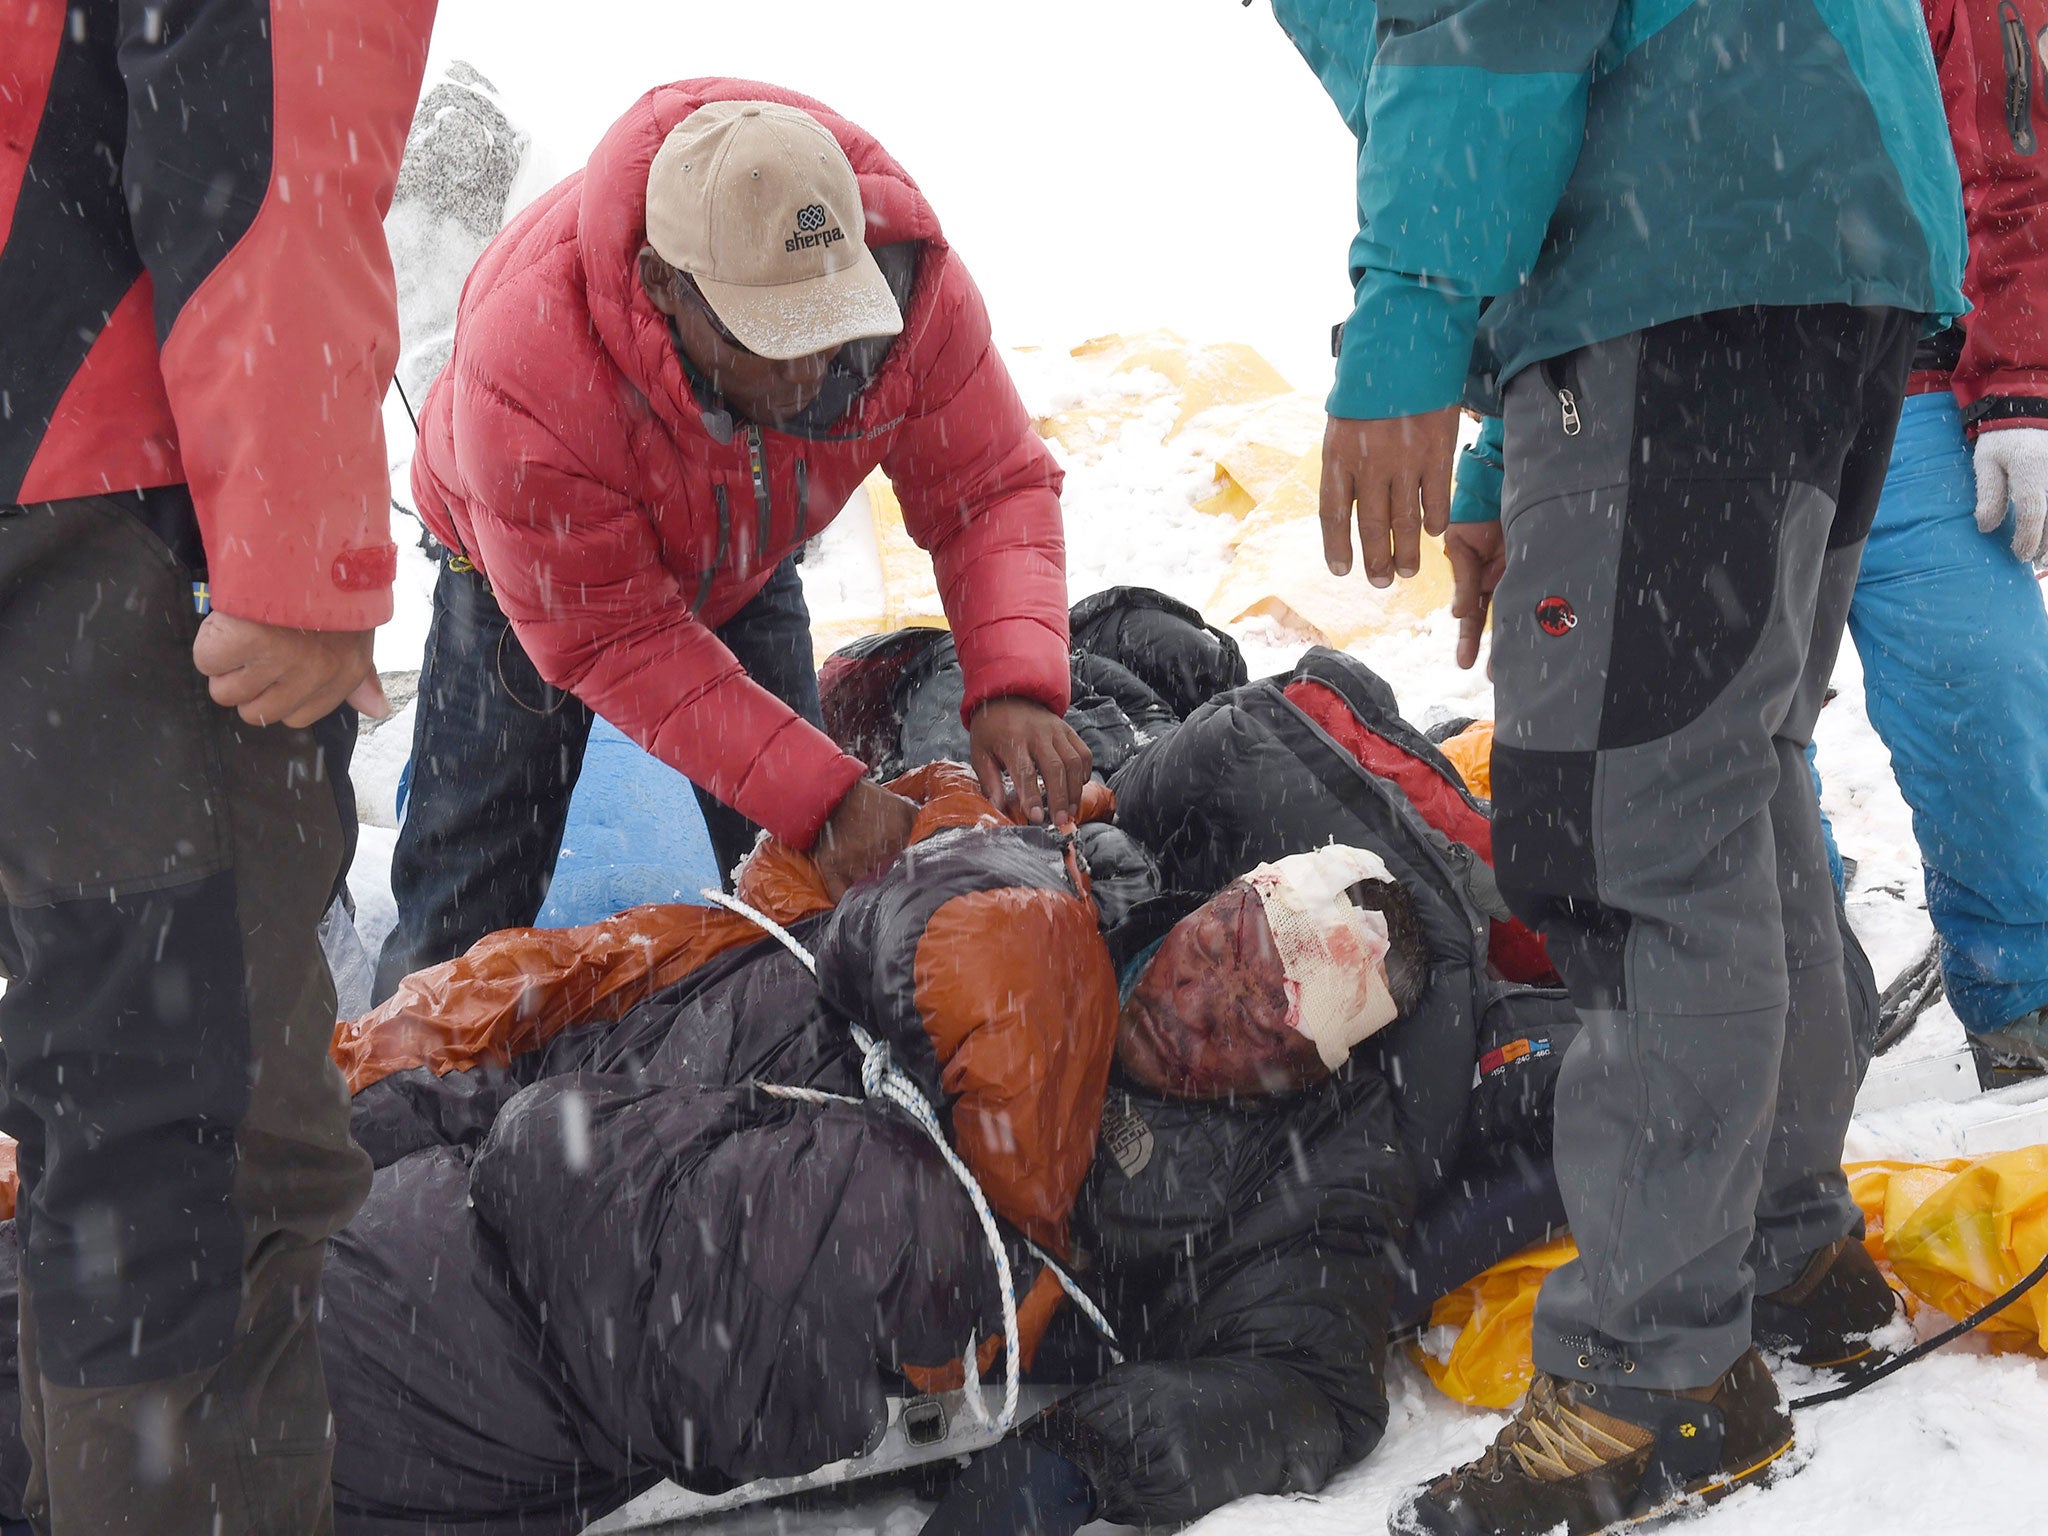 Rescuers tend to a sherpa injured by an avalanche that flattened parts of Everest Base Camp. Rescuers in Nepal are searching frantically for survivors of a huge quake, that killed more than 3,000 people, digging through rubble in the devastated capital Kathmandu and airlifting victims of an avalanche at Everest base camp